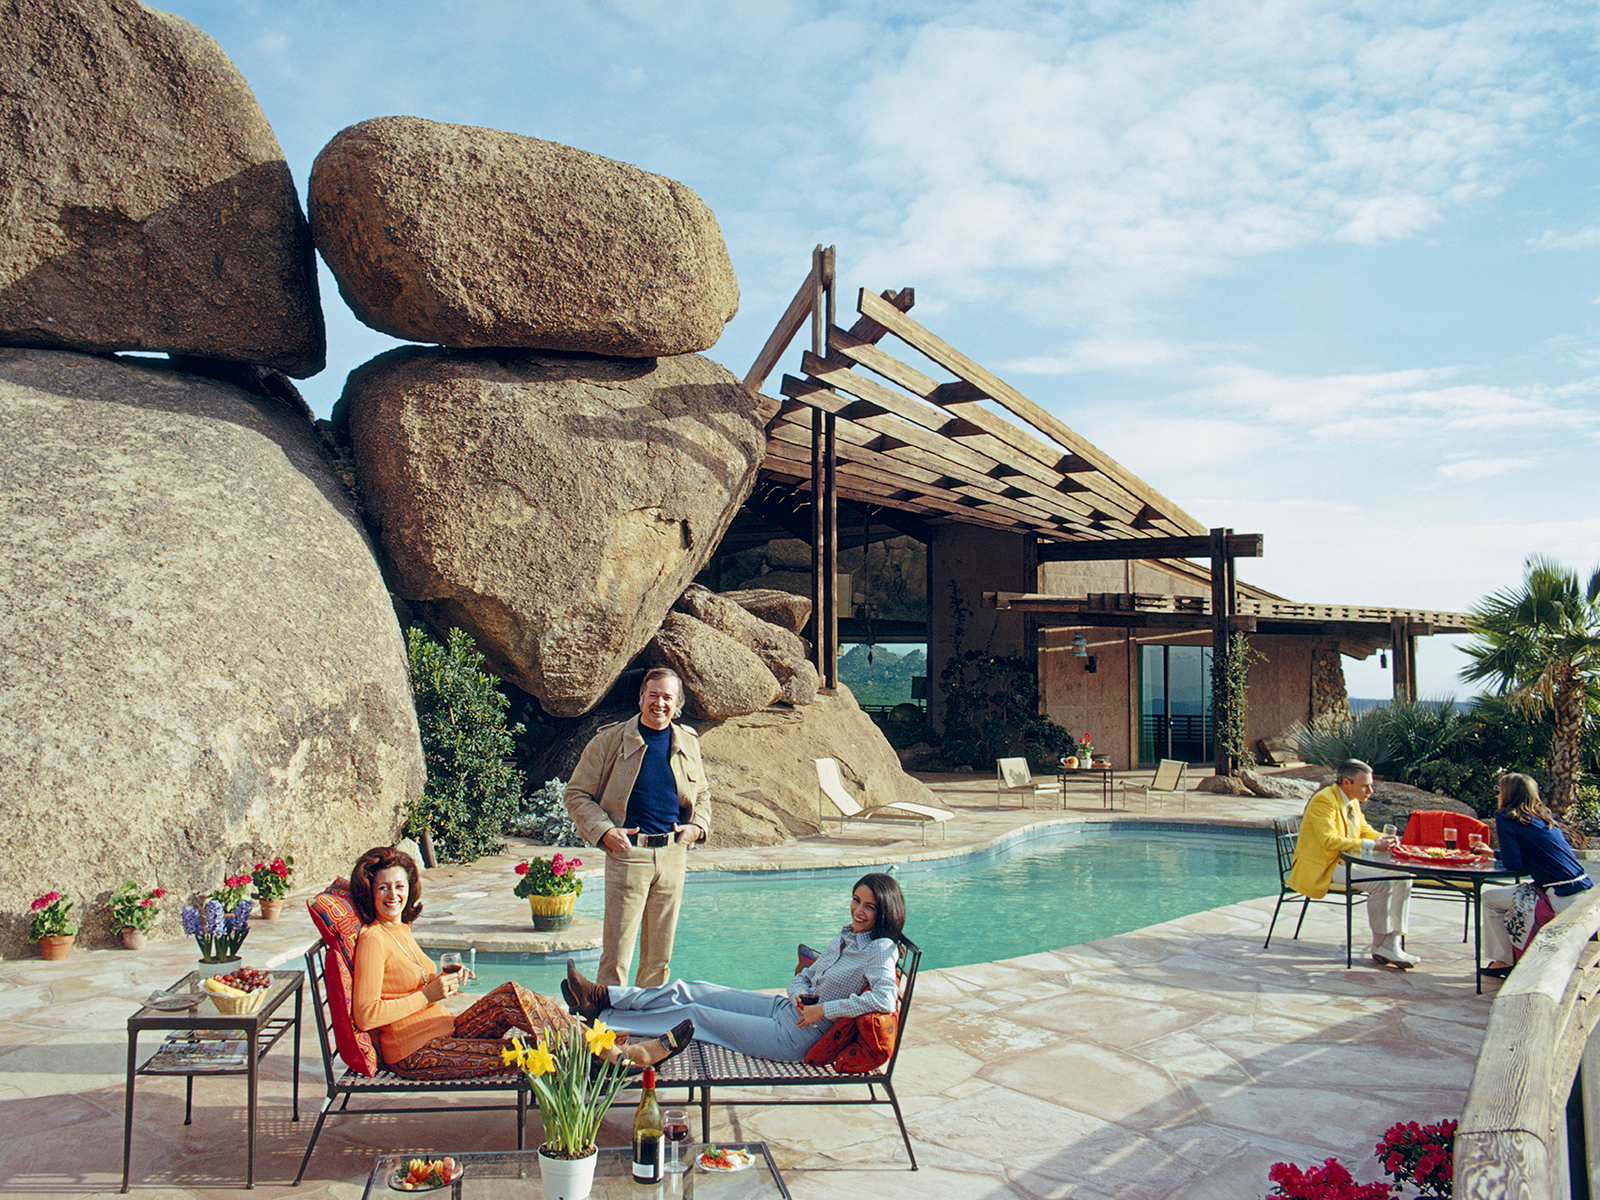 Slim Aarons’s Photography Caught the Elite in Their Habitats. A New Book Captures a Lost World